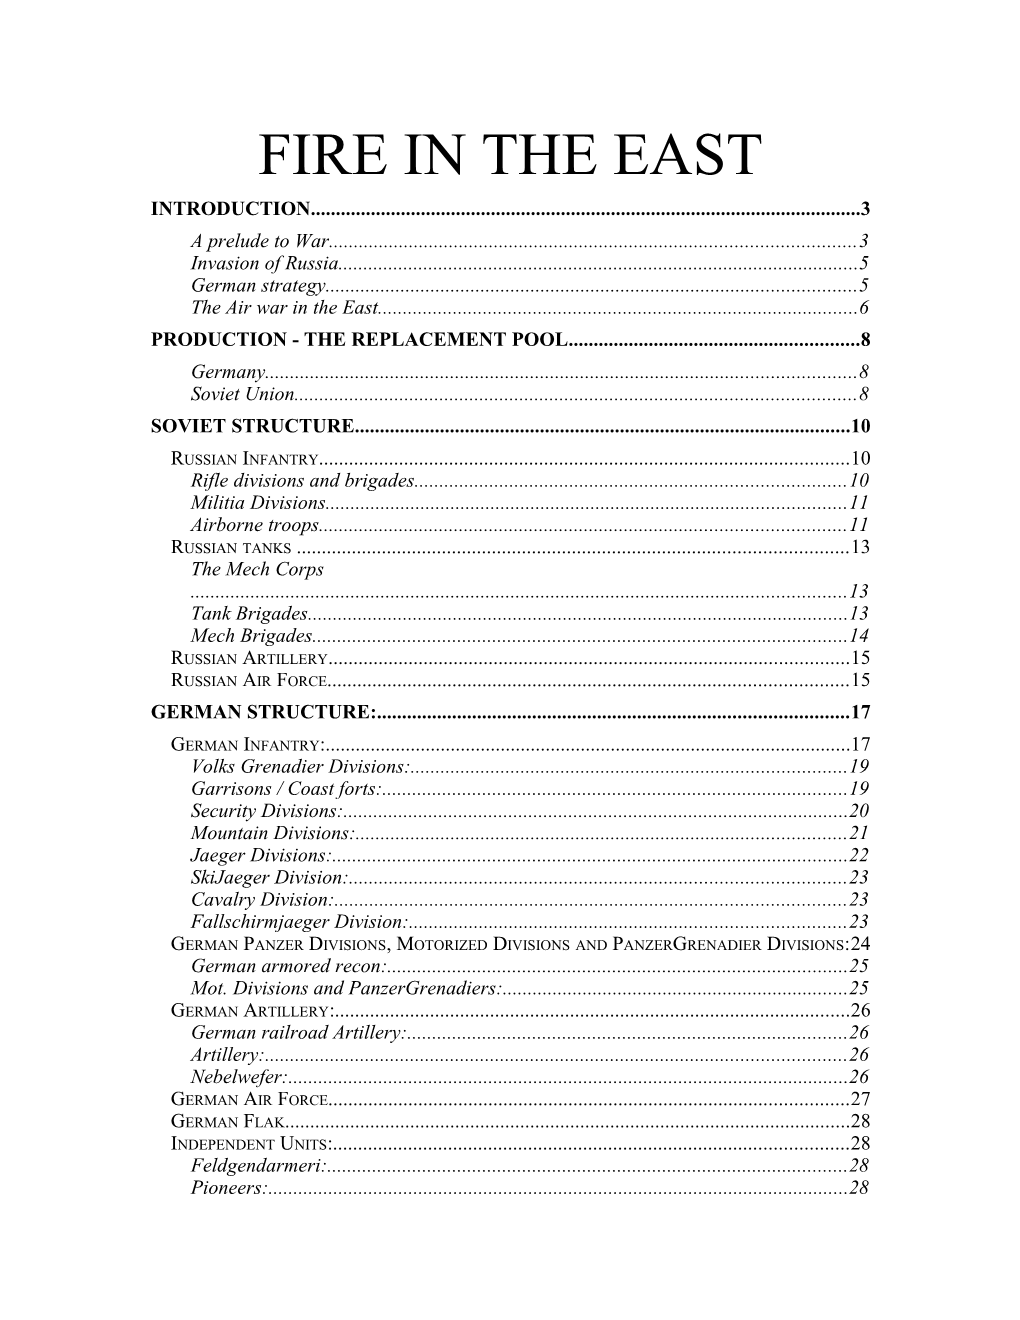 Introduction to Fire in the East